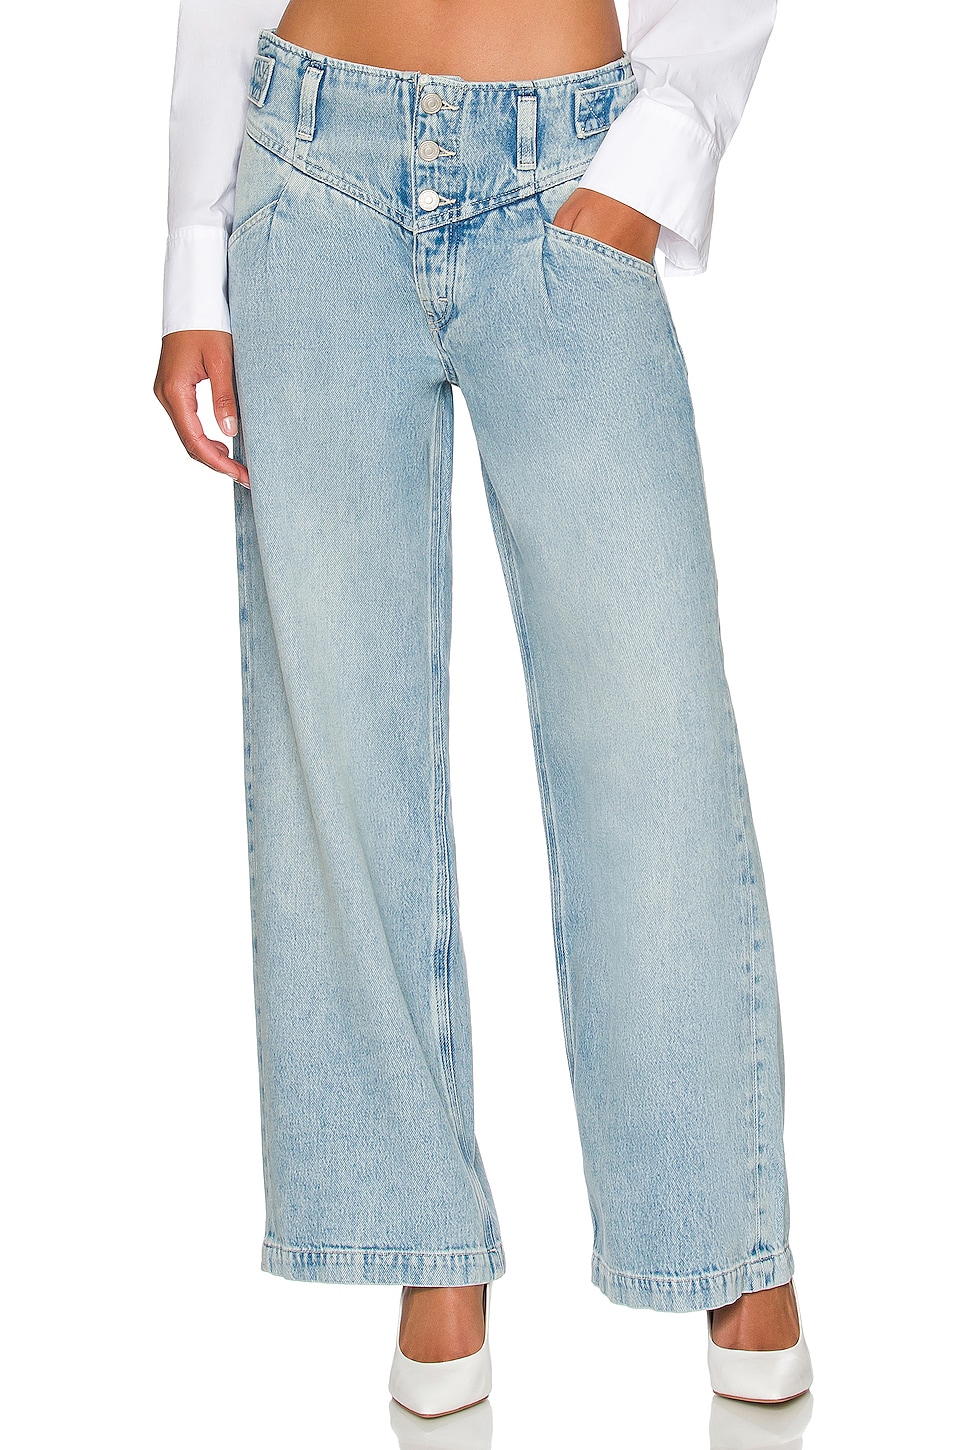 Free People x Care FP Super Sweeper Jean in Washed Out Blue | REVOLVE